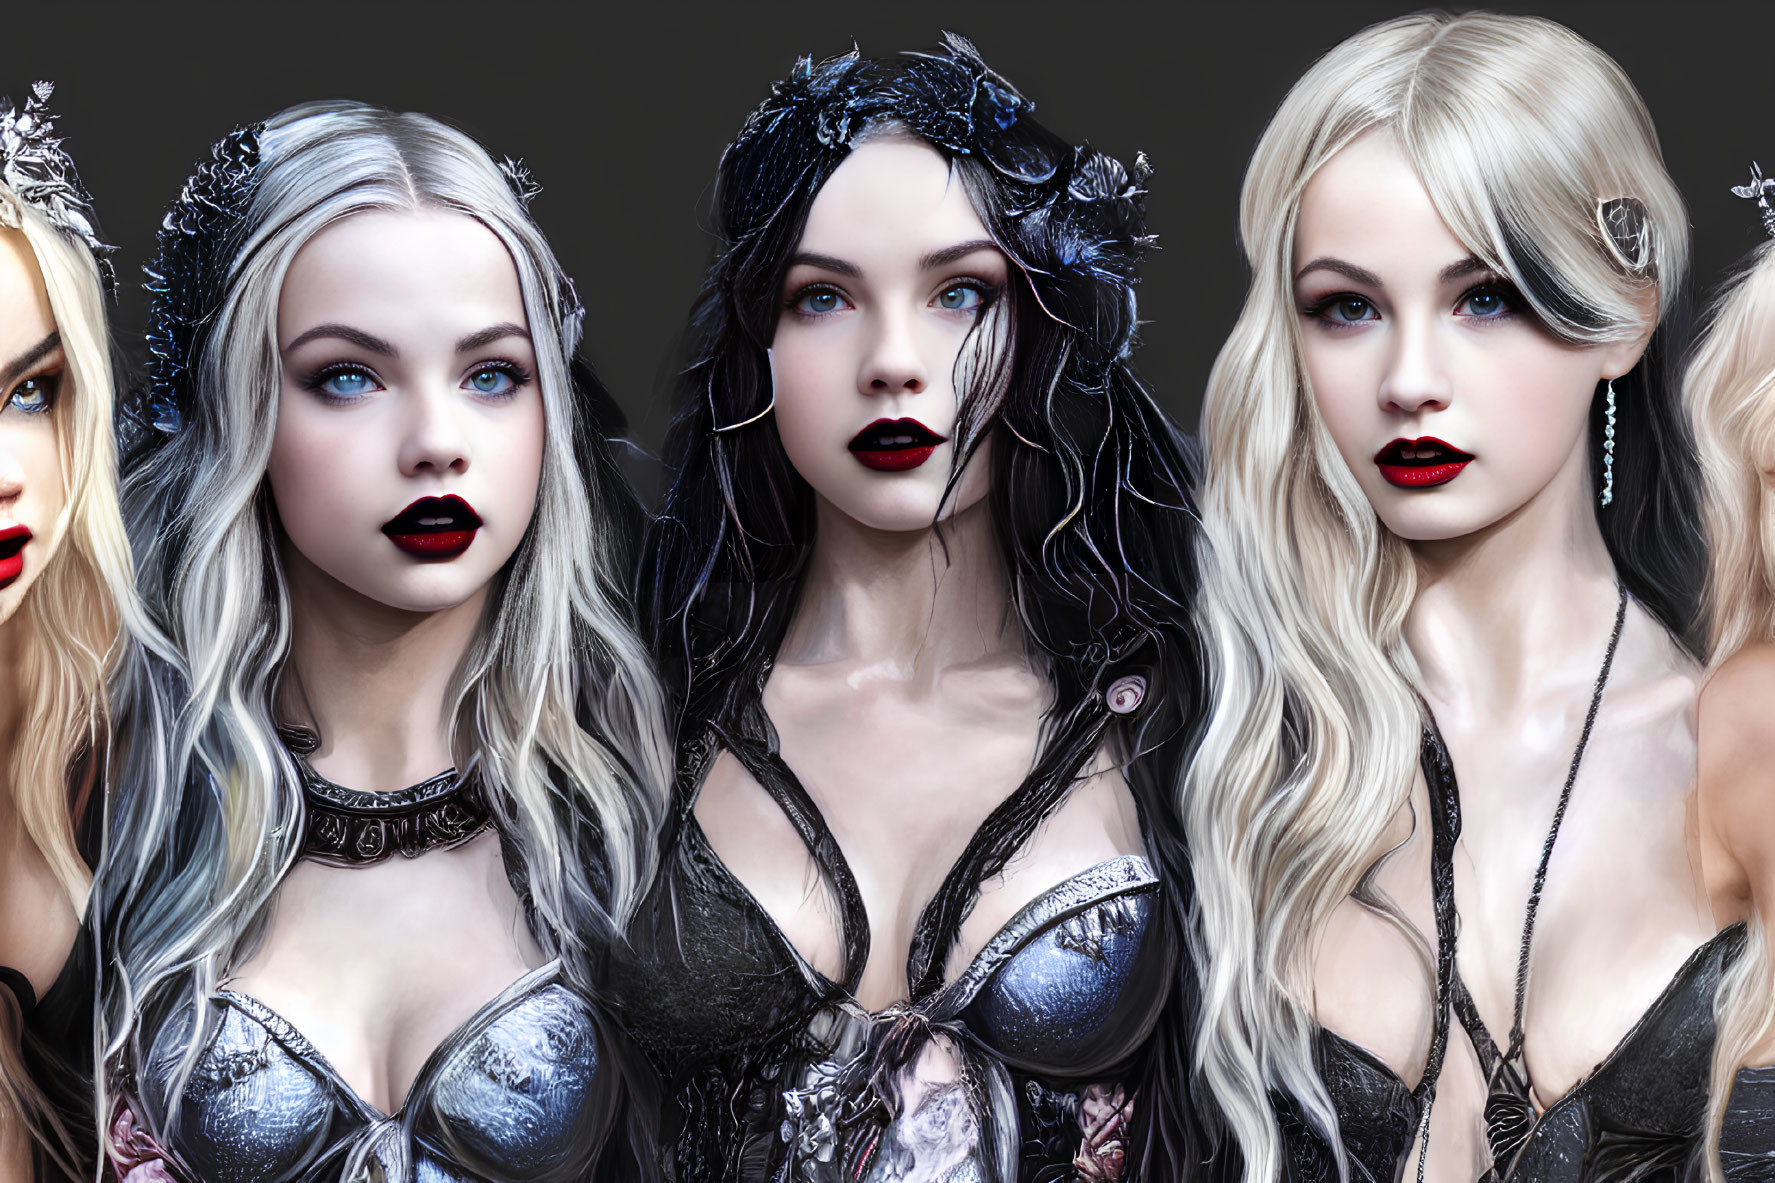 Stylized women with pale skin and gothic makeup on dark background